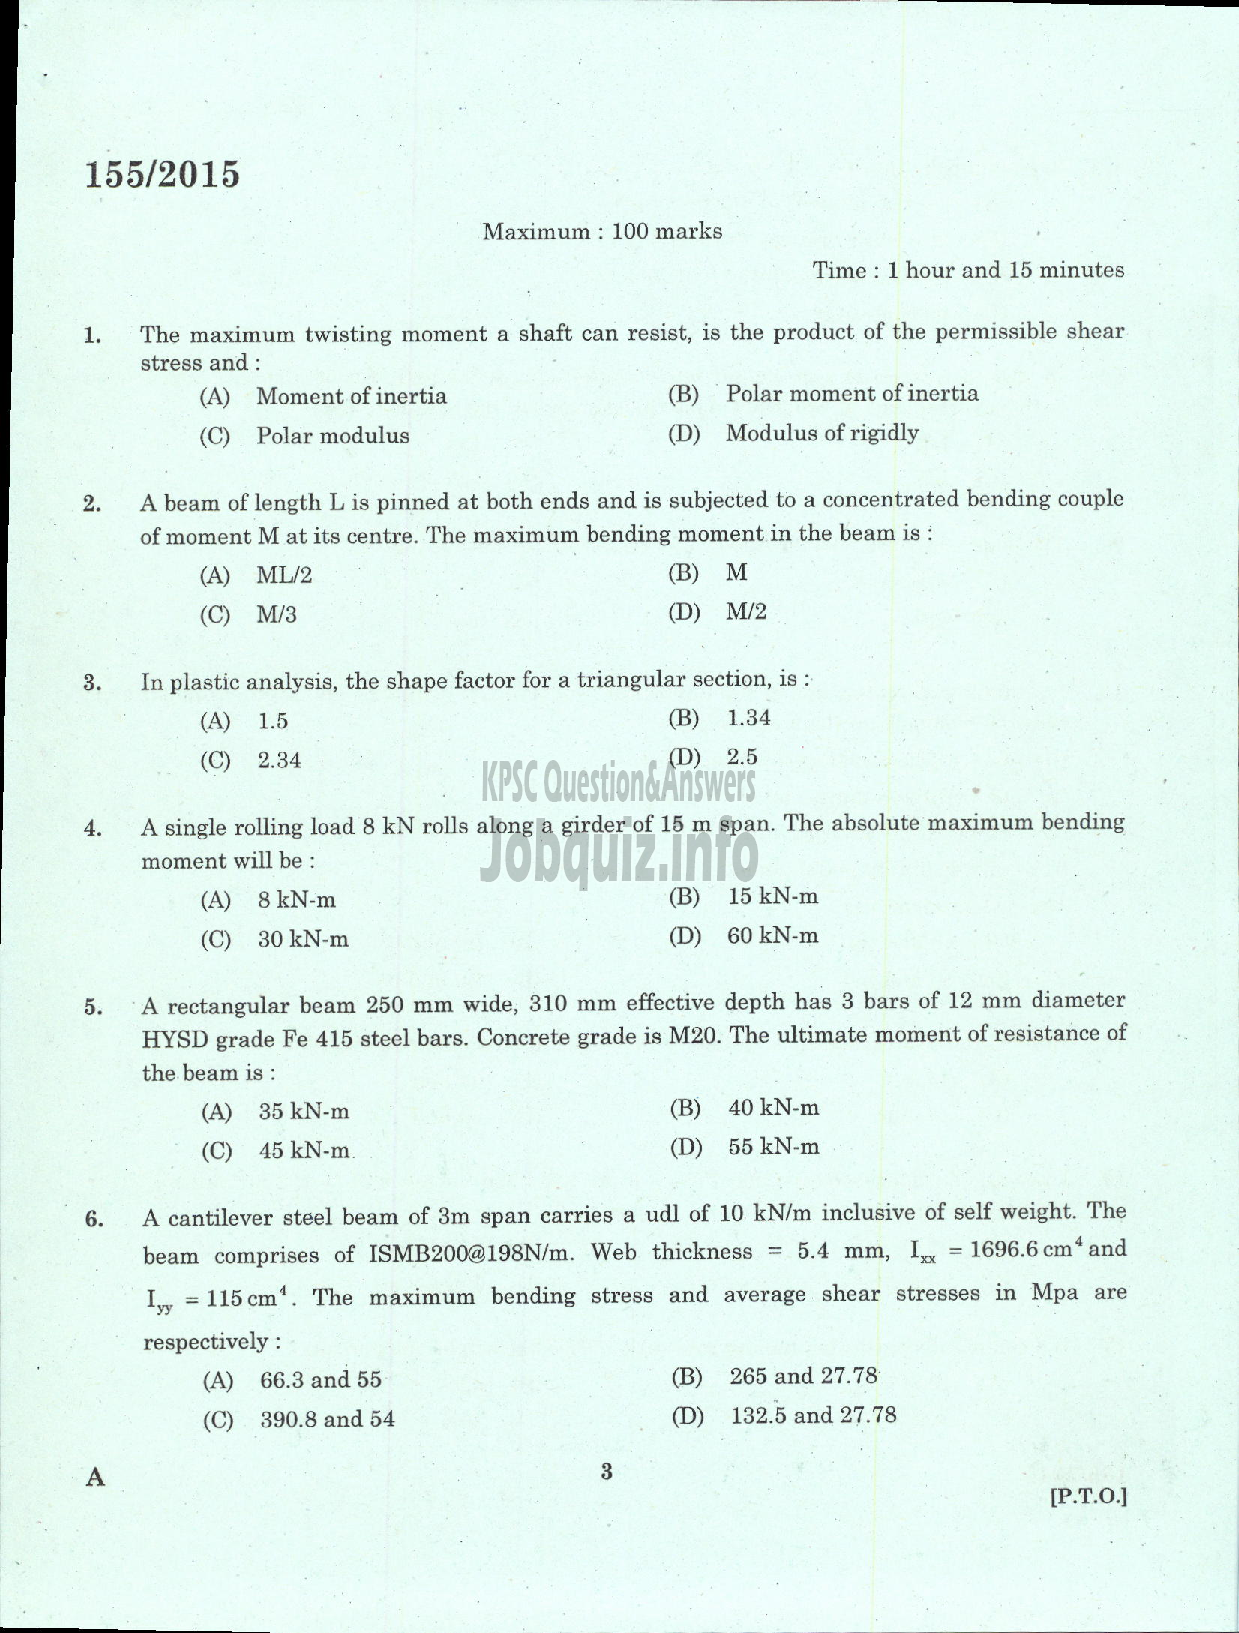 Kerala PSC Question Paper - ASSISTANT TOWN PLANNER TOWN AND COUNTRY PLANNING-1